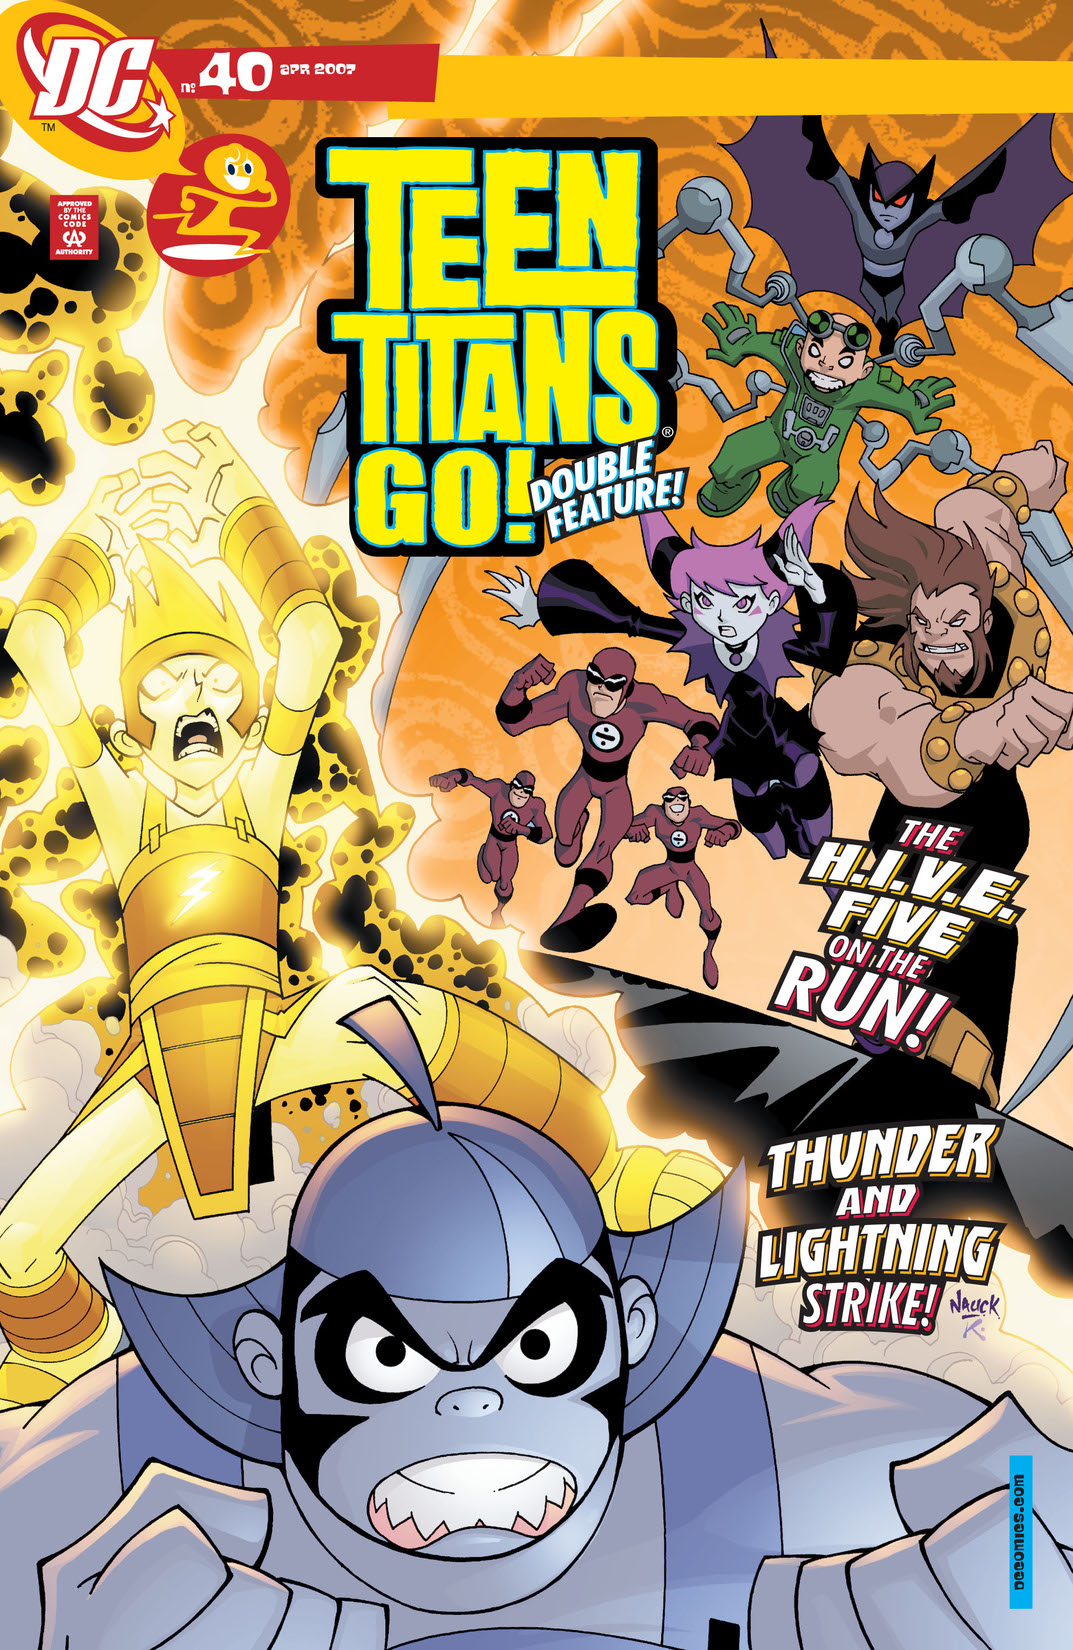 Teen Titans Go! (2003-) #40 preview images